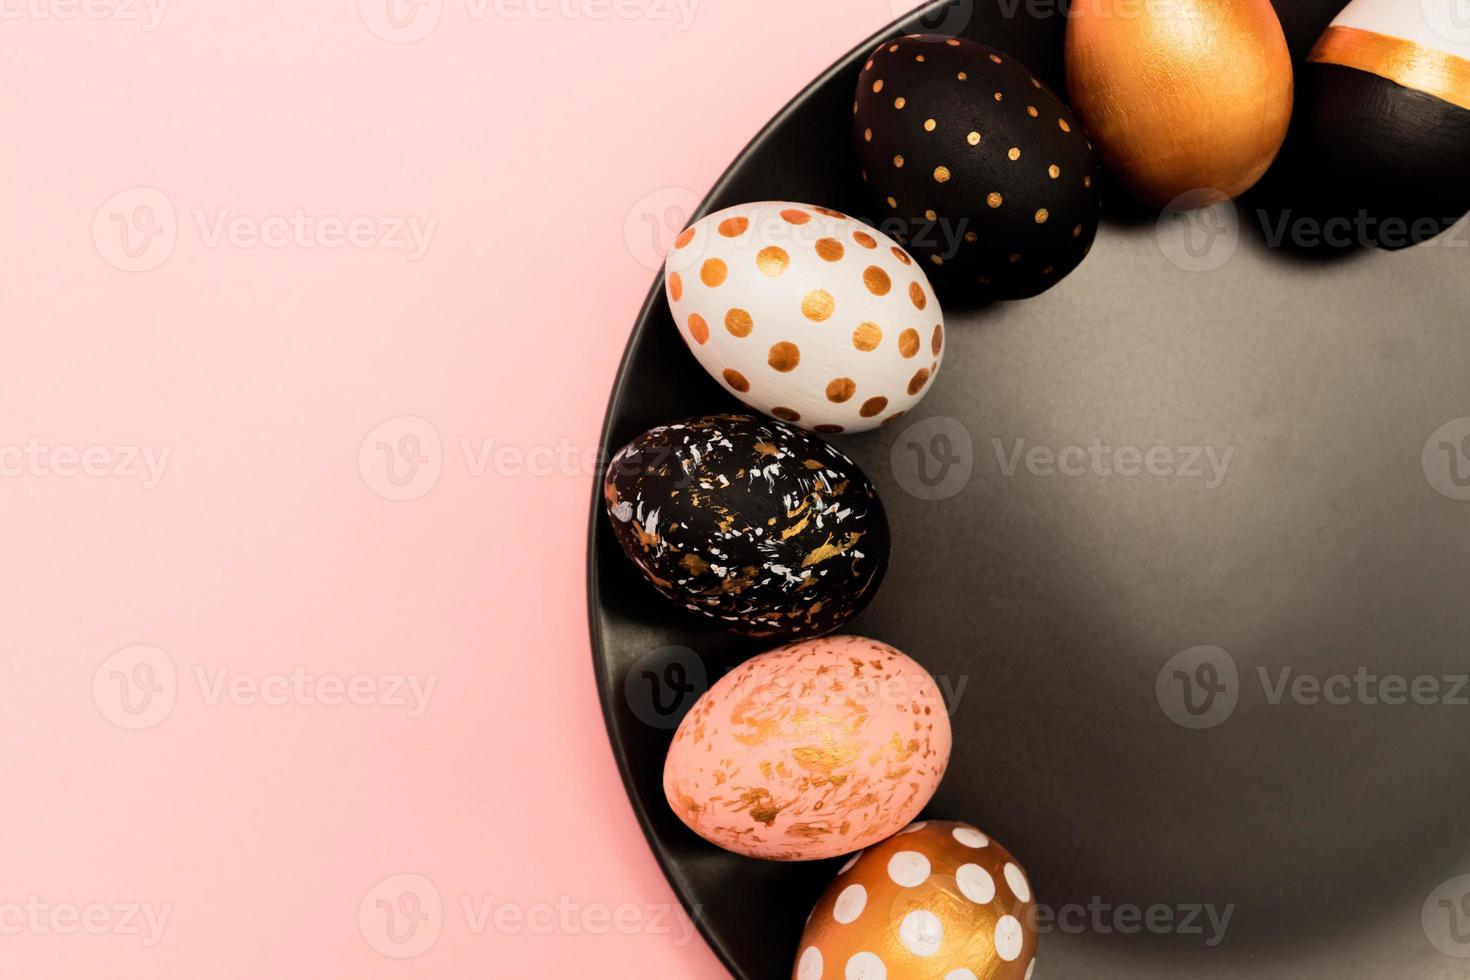 Top view of pink, white and golden decorated eeaster eggs on black plate on pink background. Trendy holiday backdrop photo